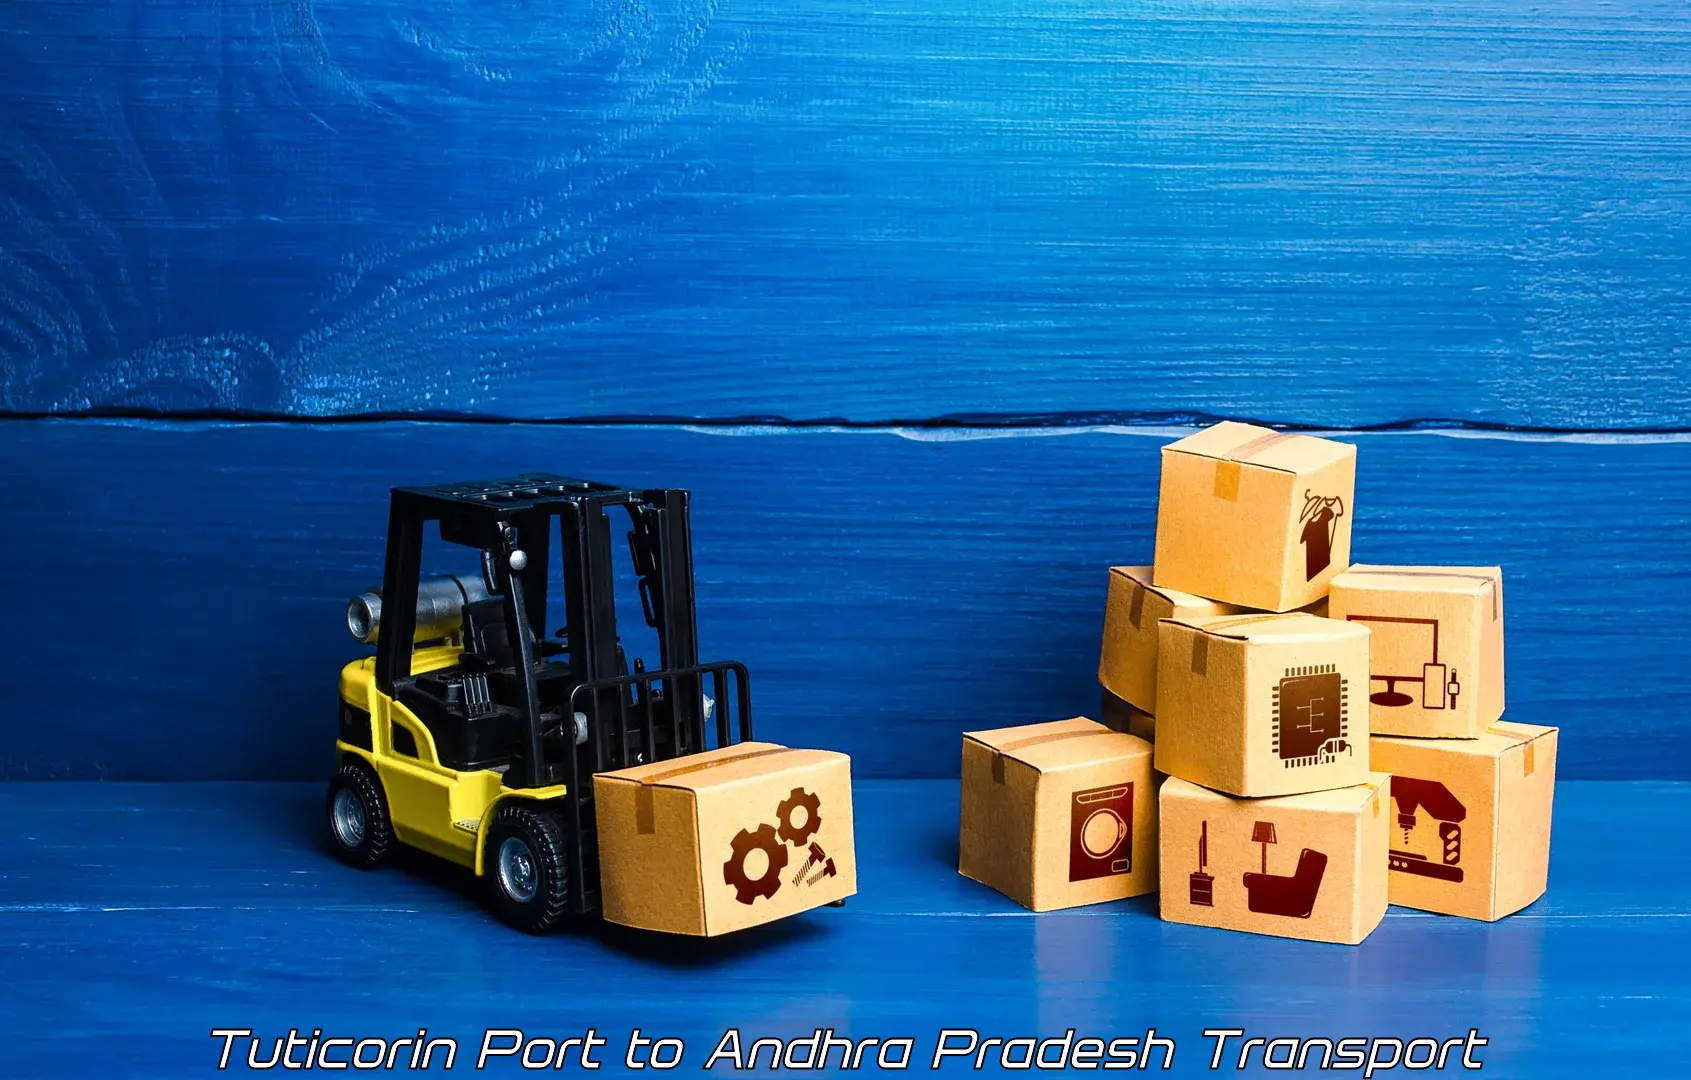 Transport in sharing in Tuticorin Port to Pulivendula